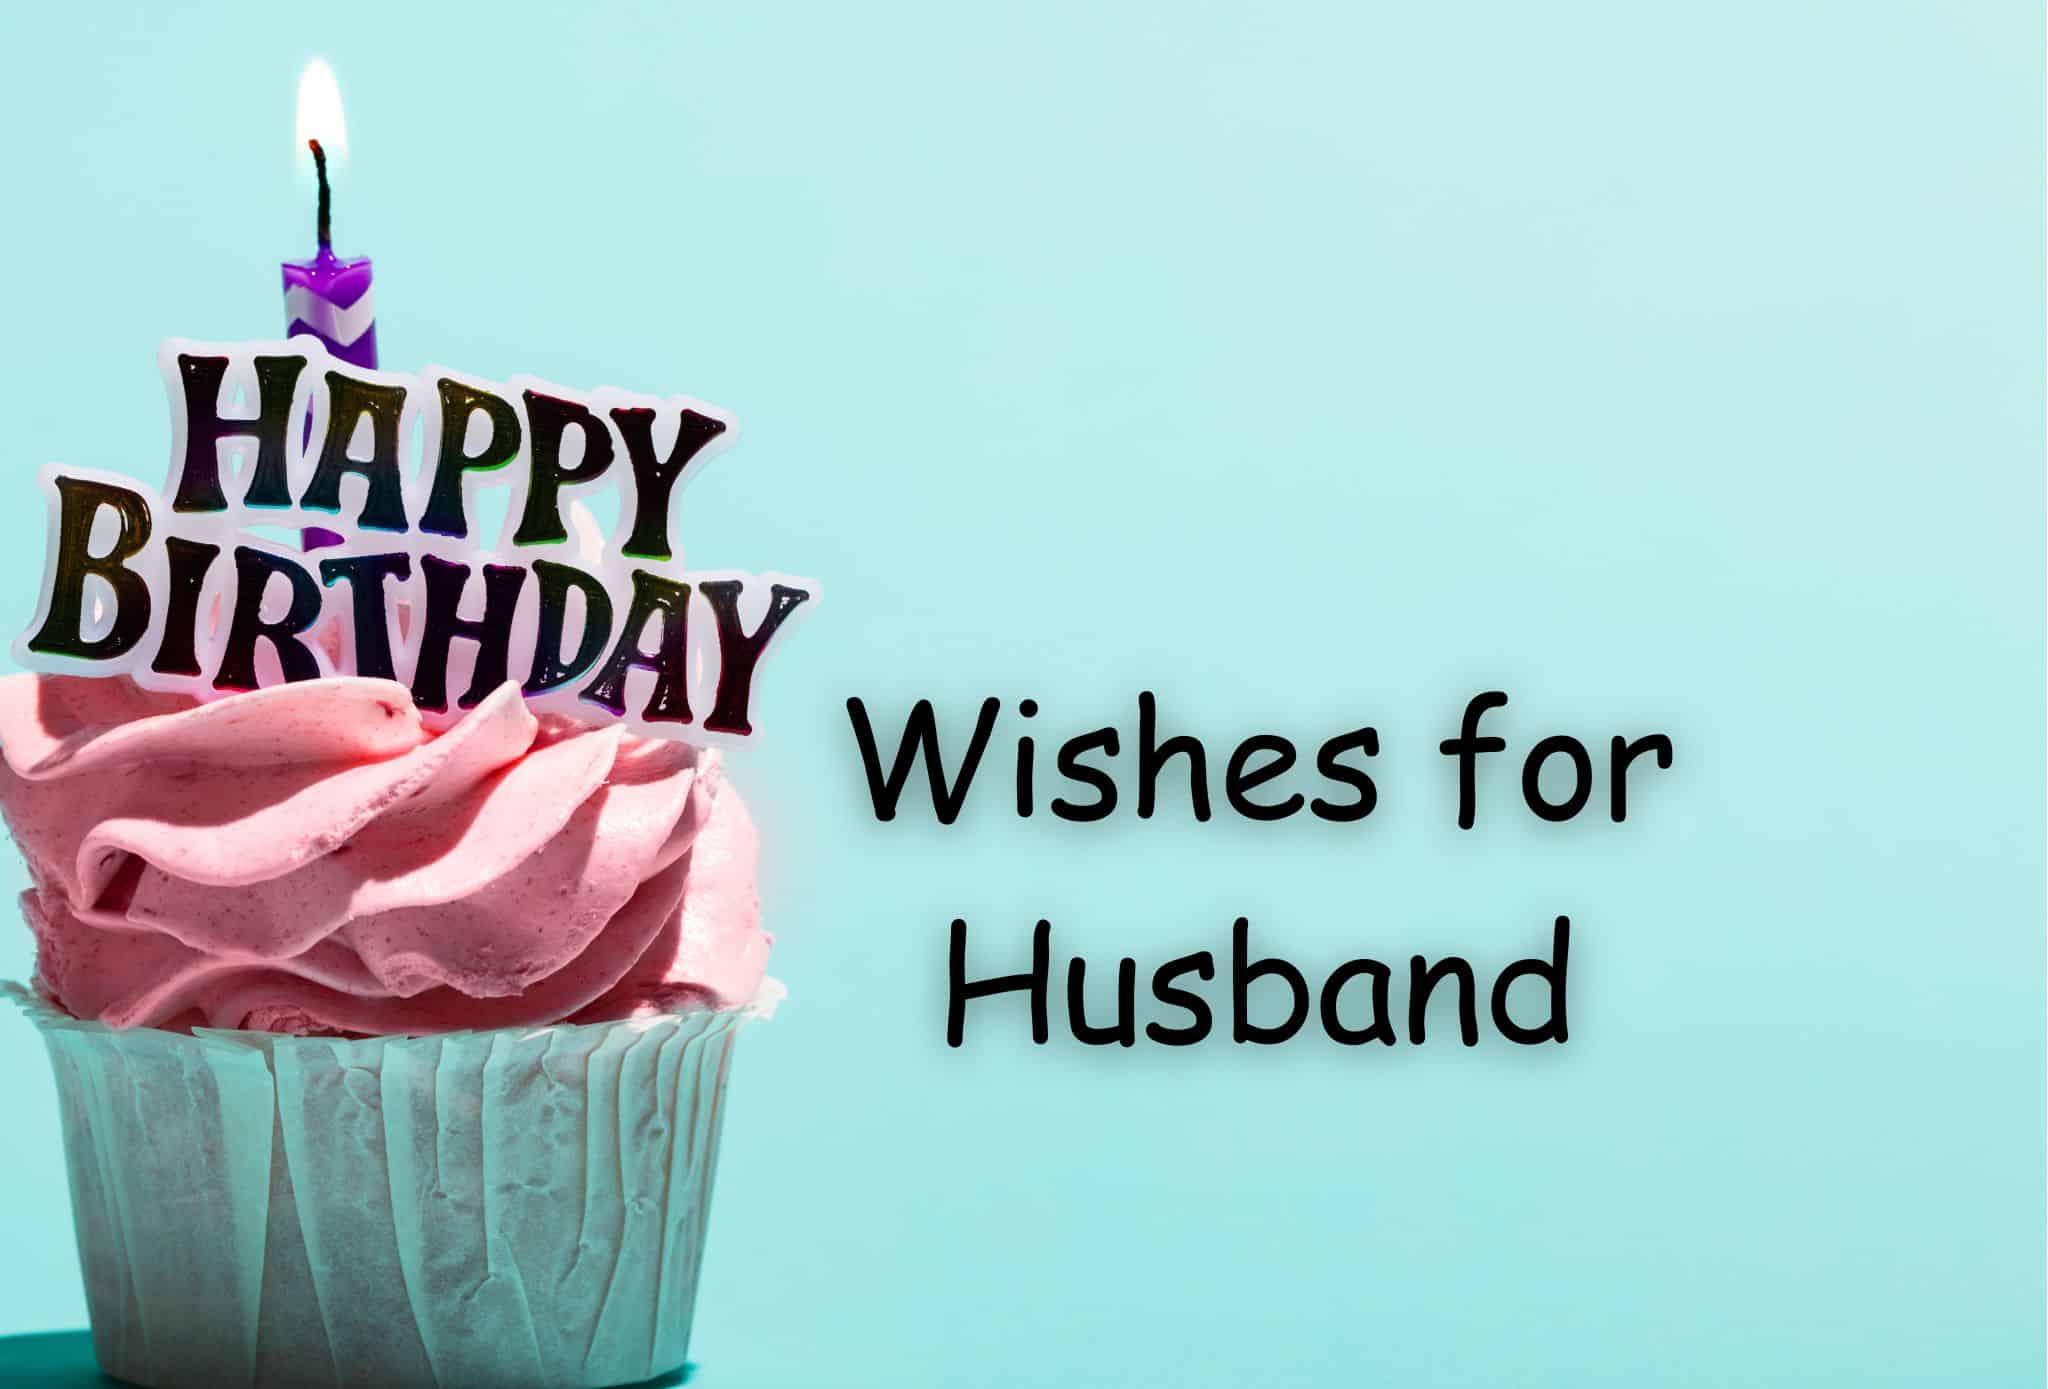 wishes for husband